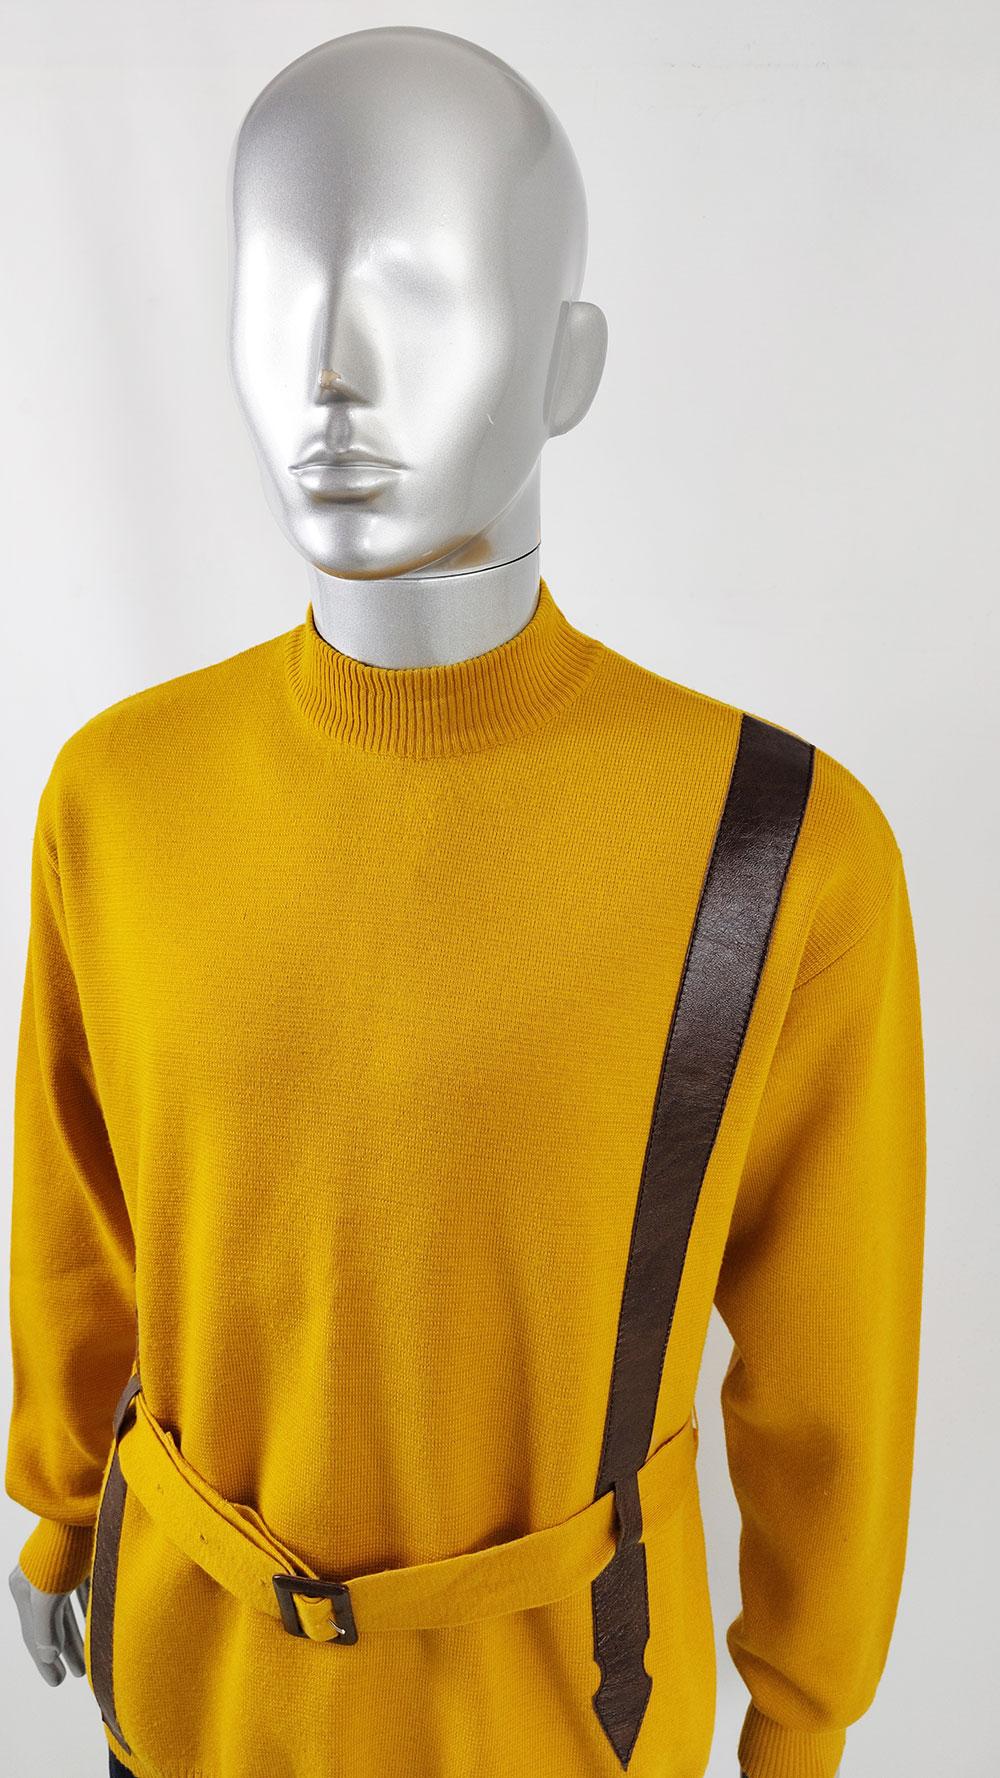 Harrods Vintage Mens 60s Mustard Yellow Vinyl Belted Sweater Jumper In Good Condition For Sale In Doncaster, South Yorkshire